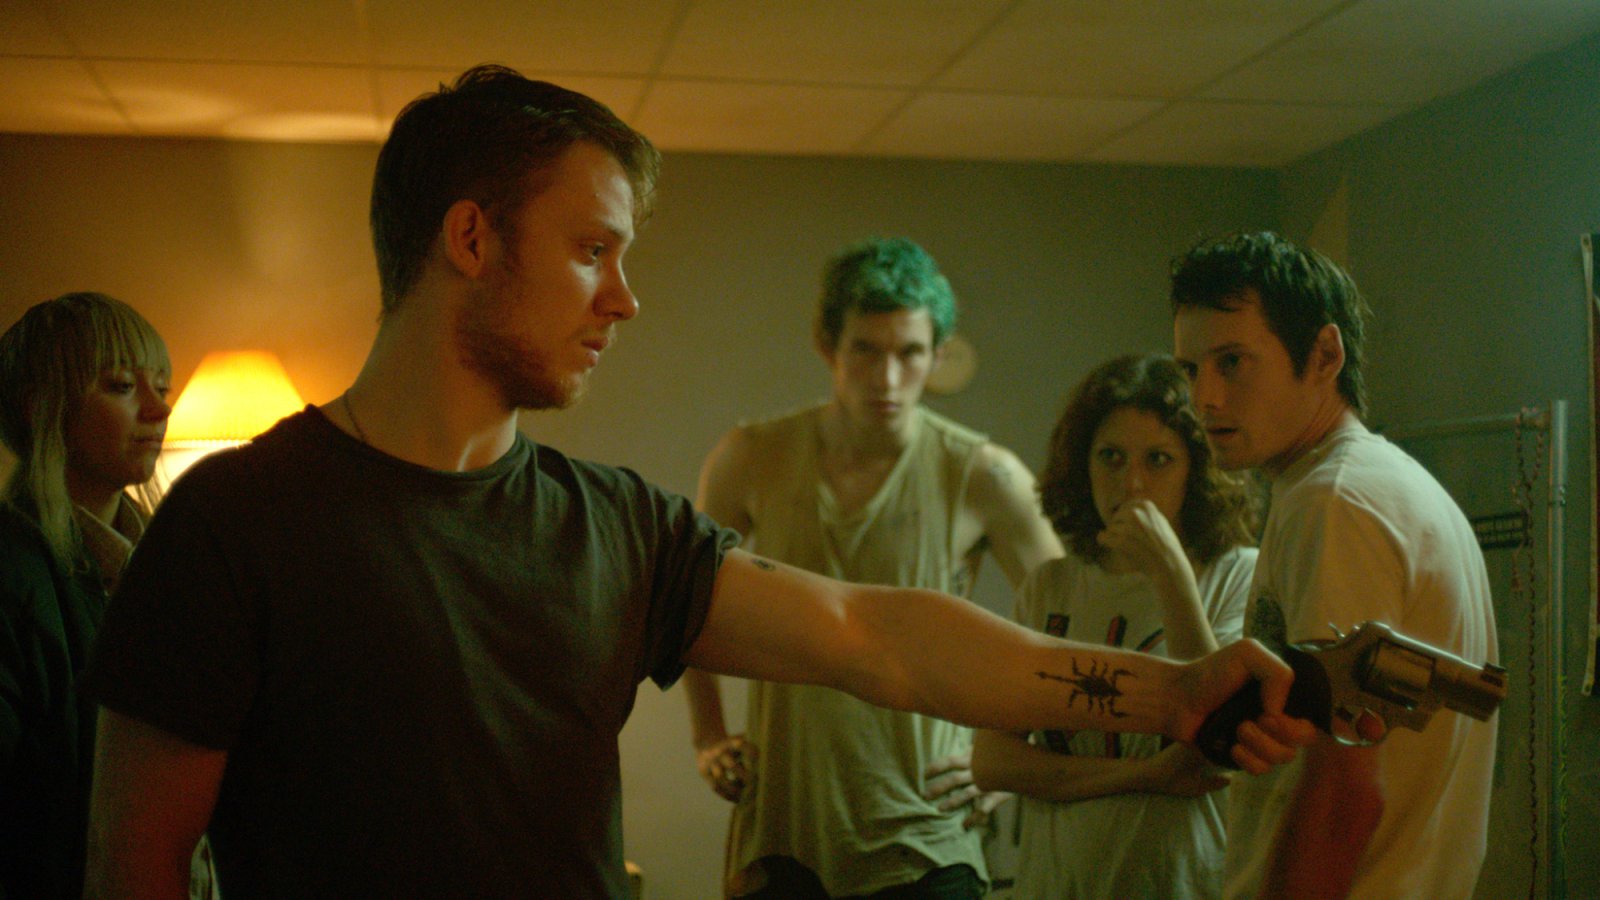 GREEN ROOM is an Expertly Nerve-Wrecking Experience